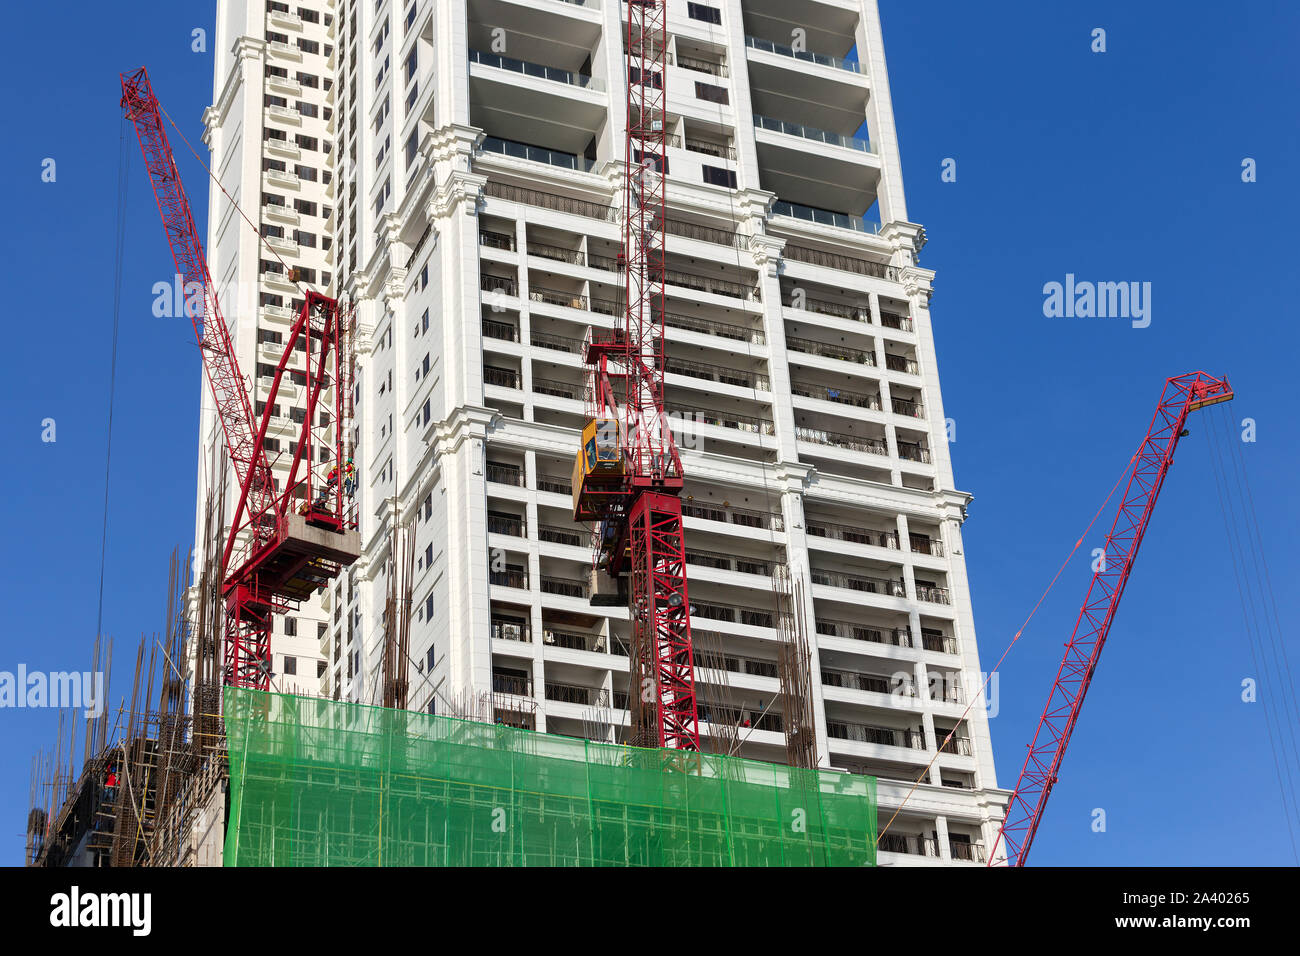 Manila, Philippines - May 16, 2017: Process of building, cranes at work on construction site Stock Photo